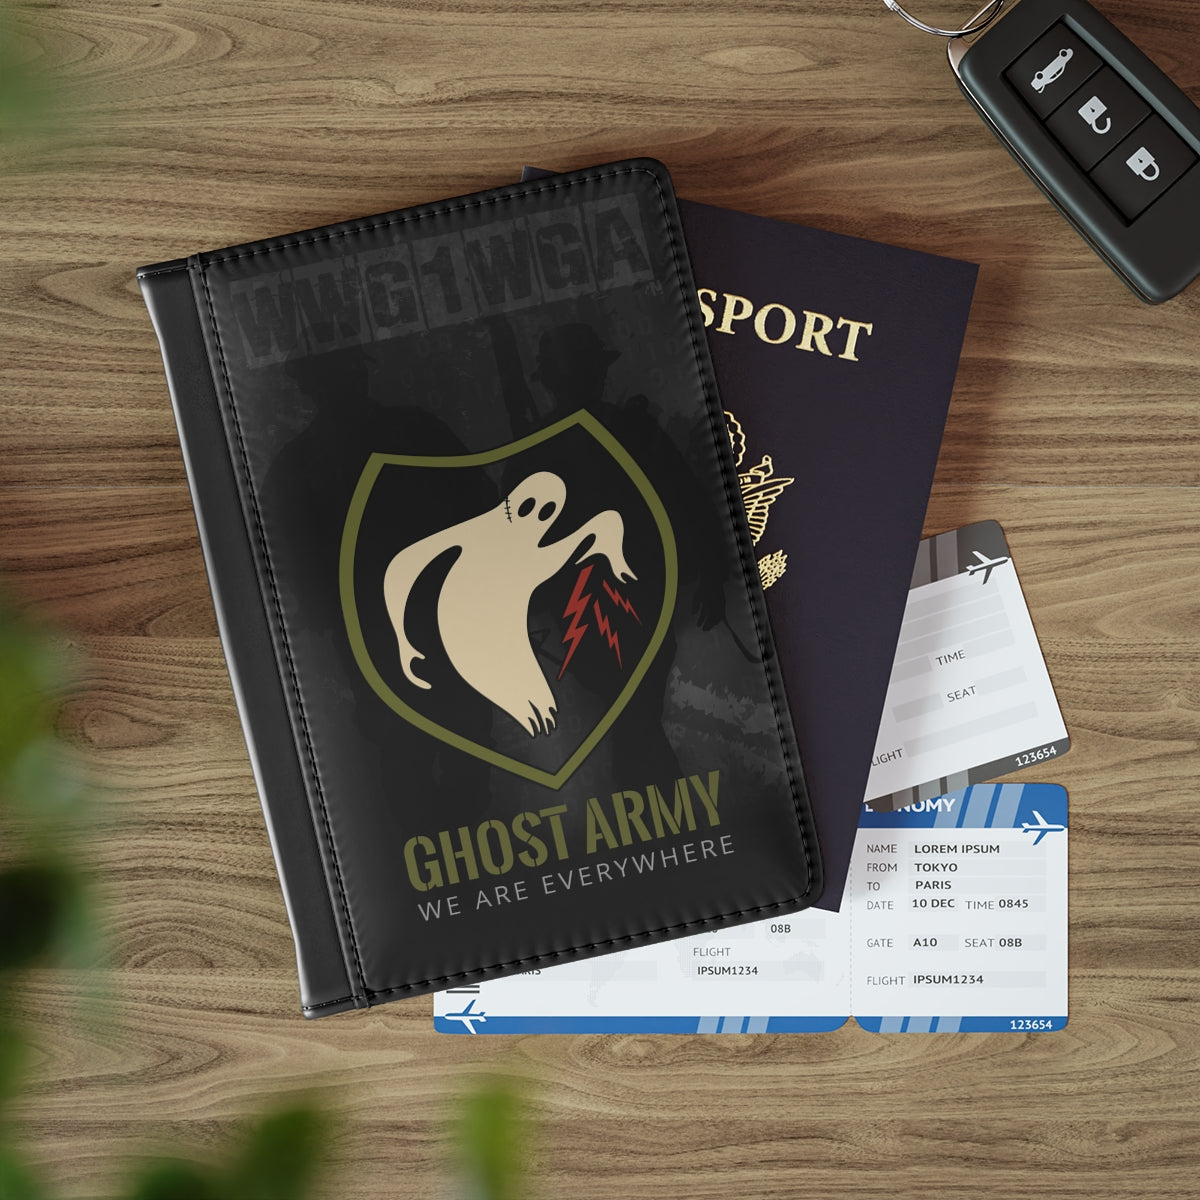 Ghost Army Passport Cover - Rise of The New Media